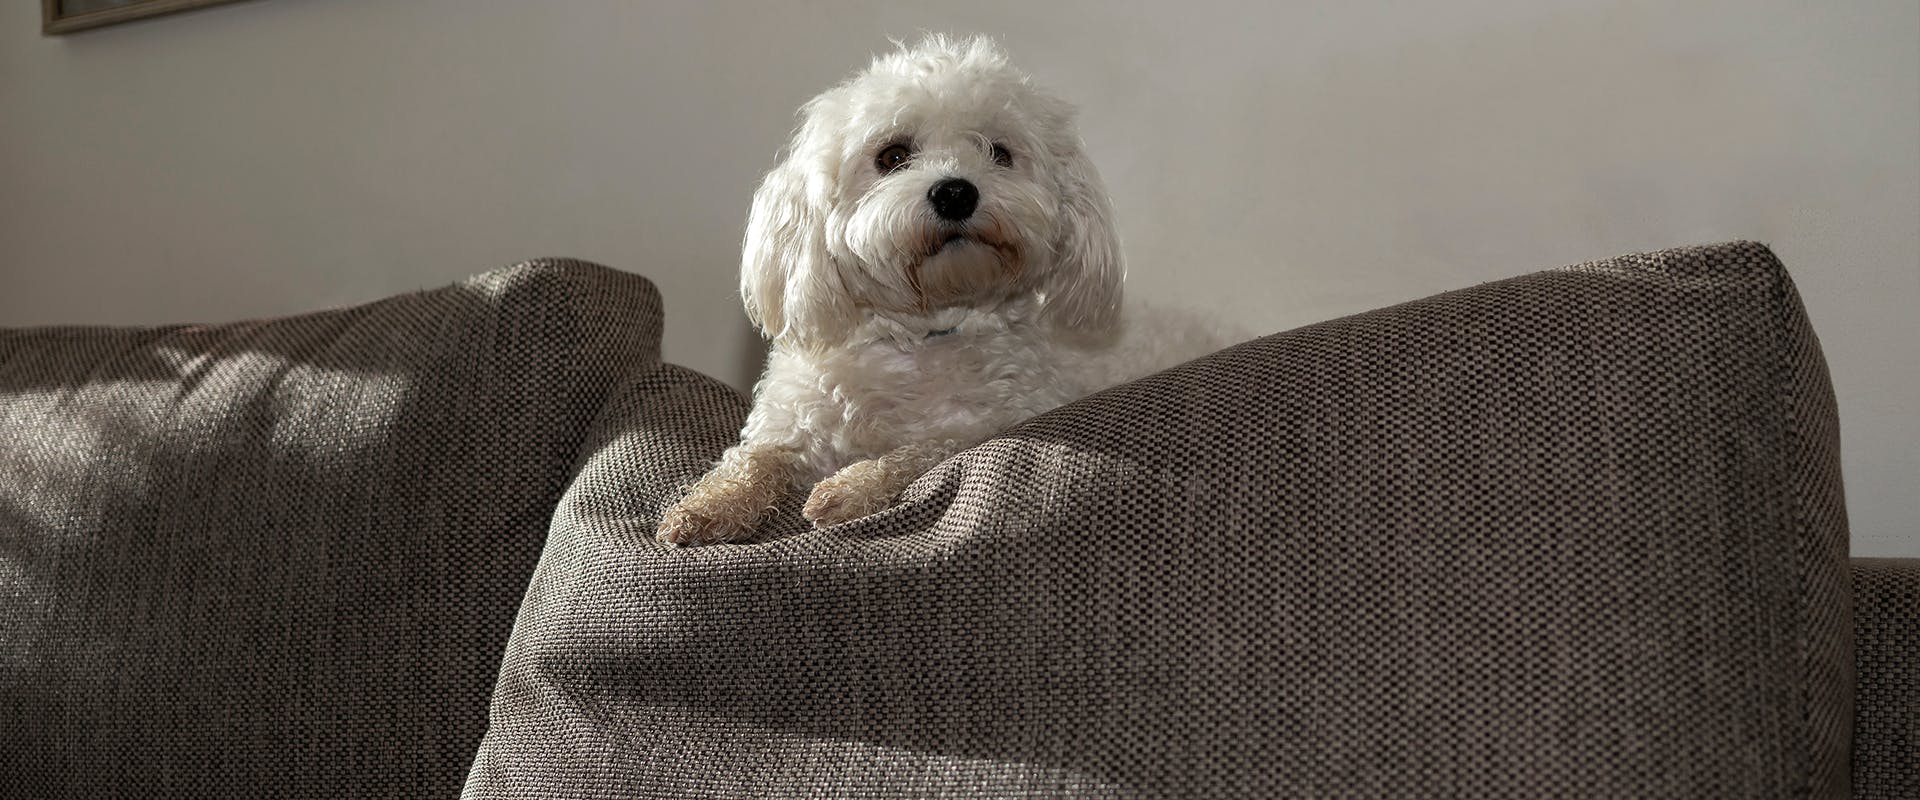 A cute Poochon puppy sitting on the top of a grey sofa